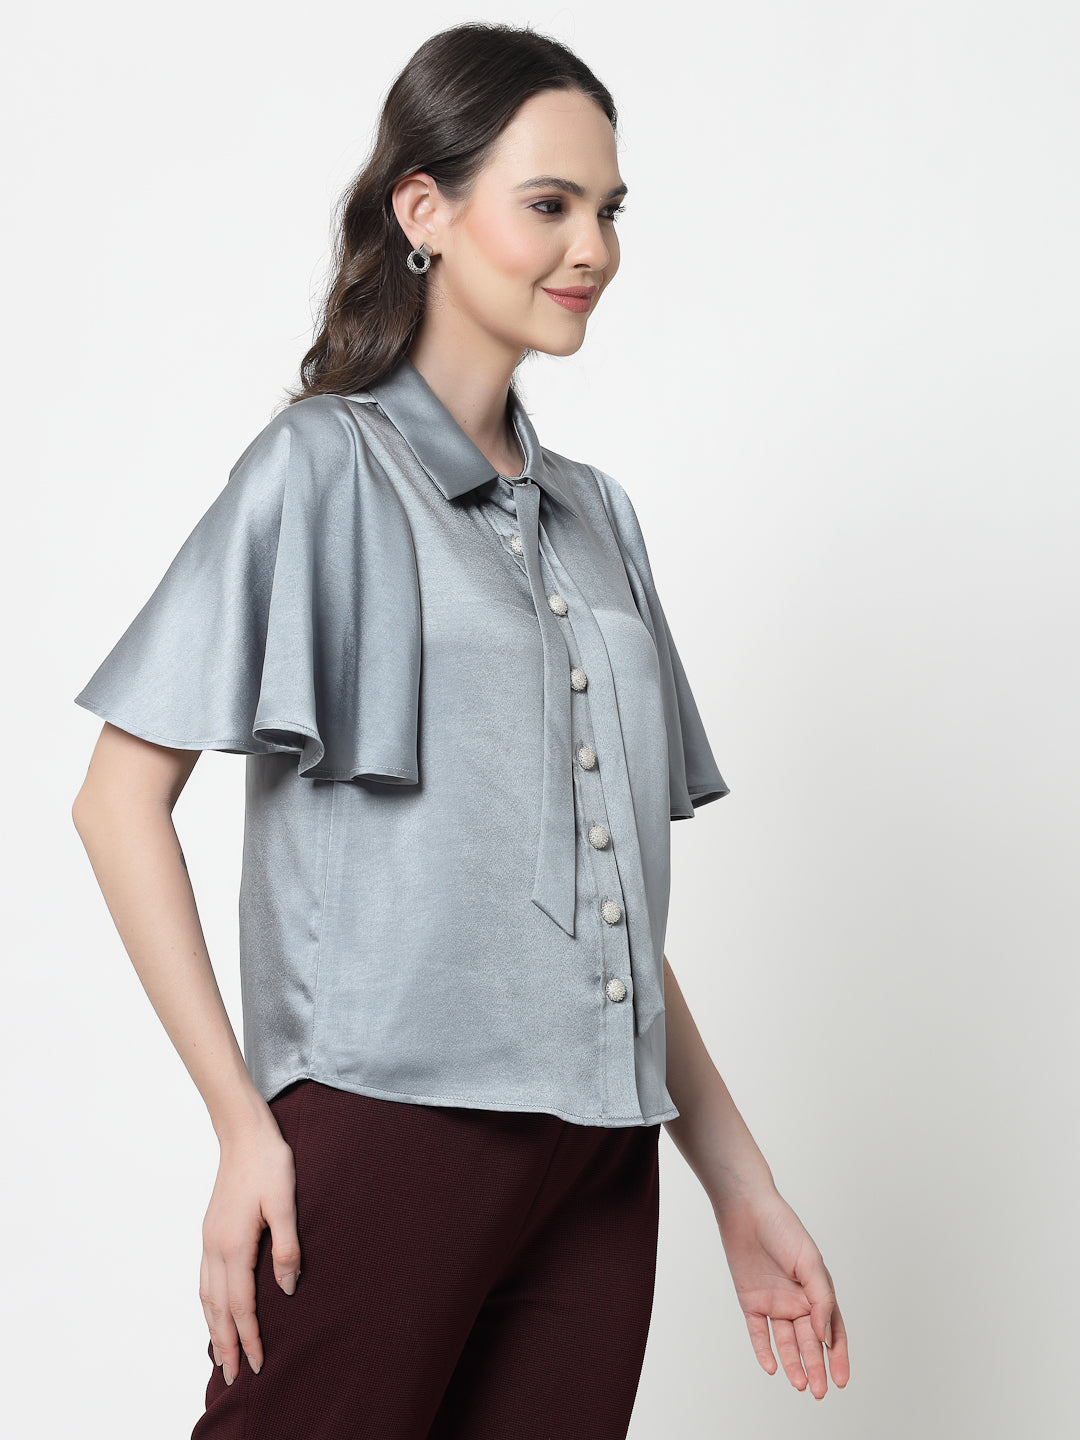 Bluish Grey Satin Top With Bell Sleeves & Tie Knot